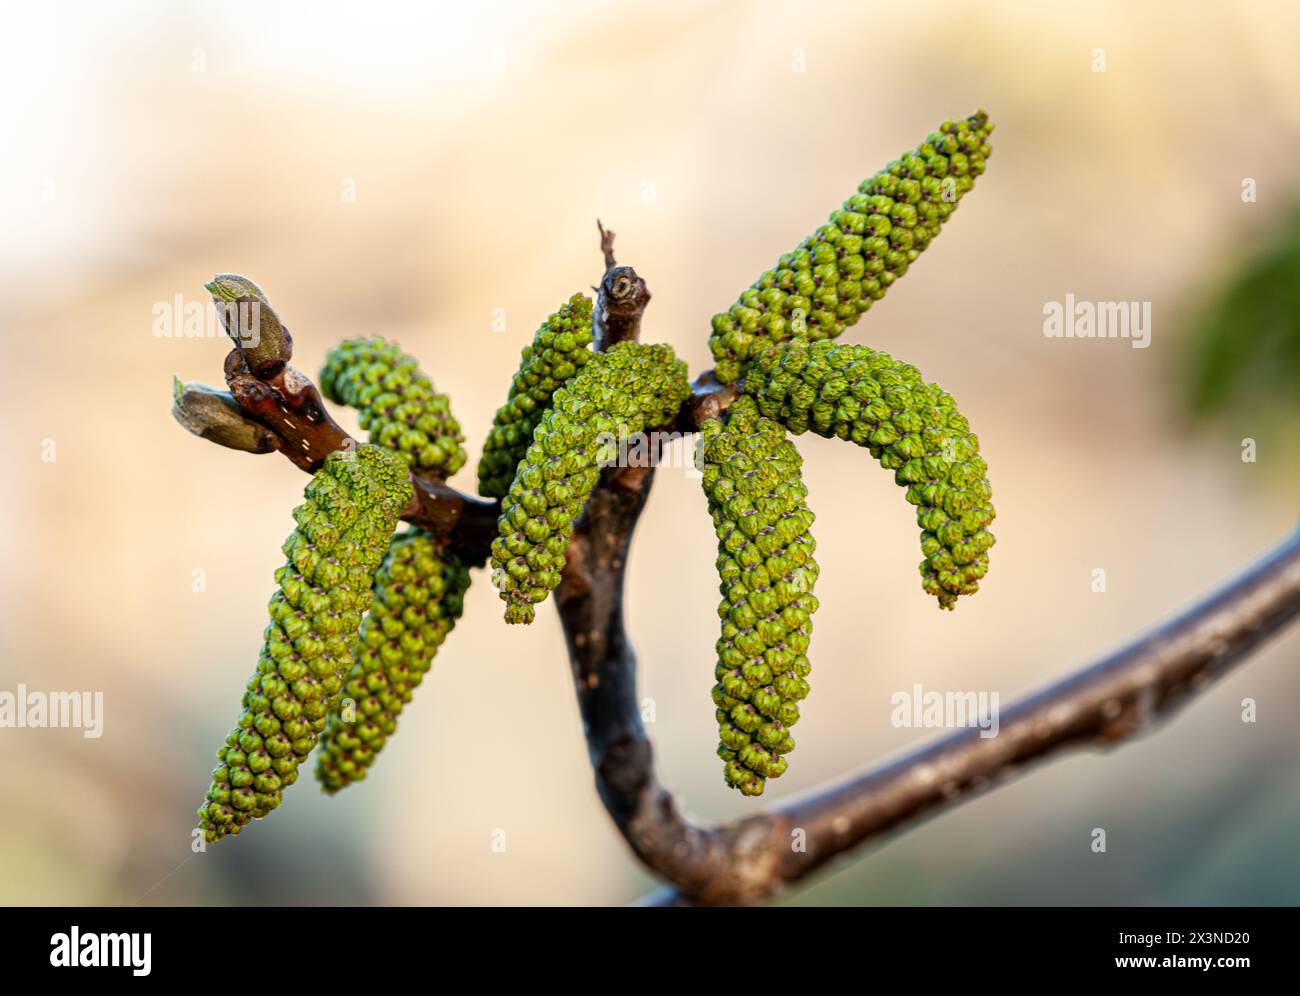 Walnut flowers. Walnut Juglans regia Catkins Flowers on a tree Close-up macro detail blooming spring green leaves of plants against the sky in the Stock Photo